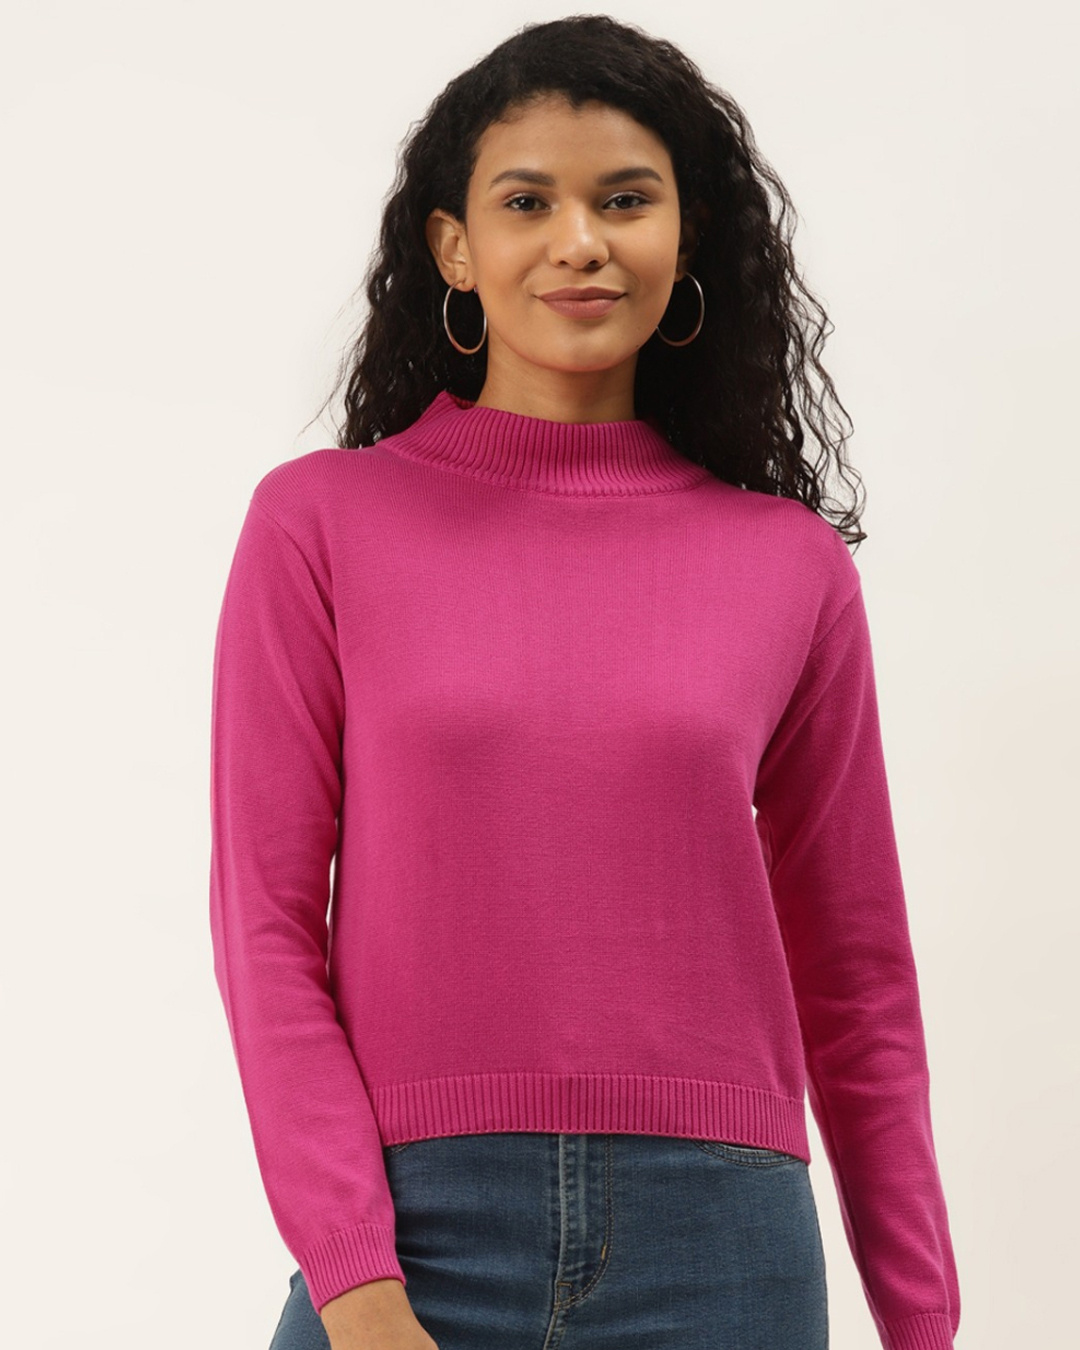 Buy Style Quotient Women's Pink Solid Pullover Sweater for Women Pink ...